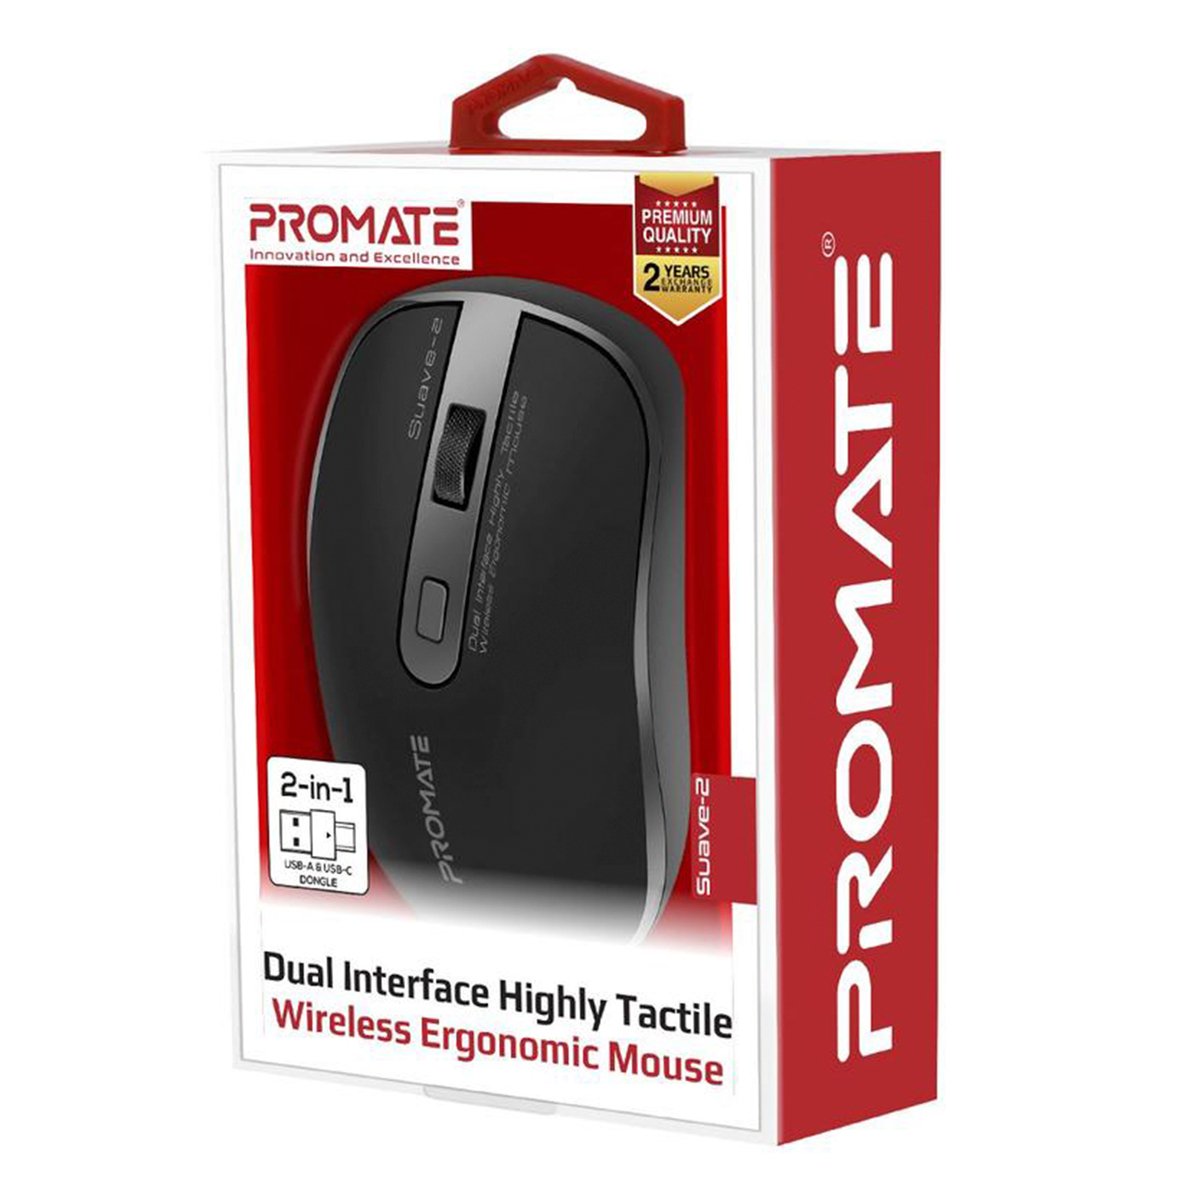 Promate Dual Interface Highly Tactile Wireless Ergonomic Mouse SUAVE-2